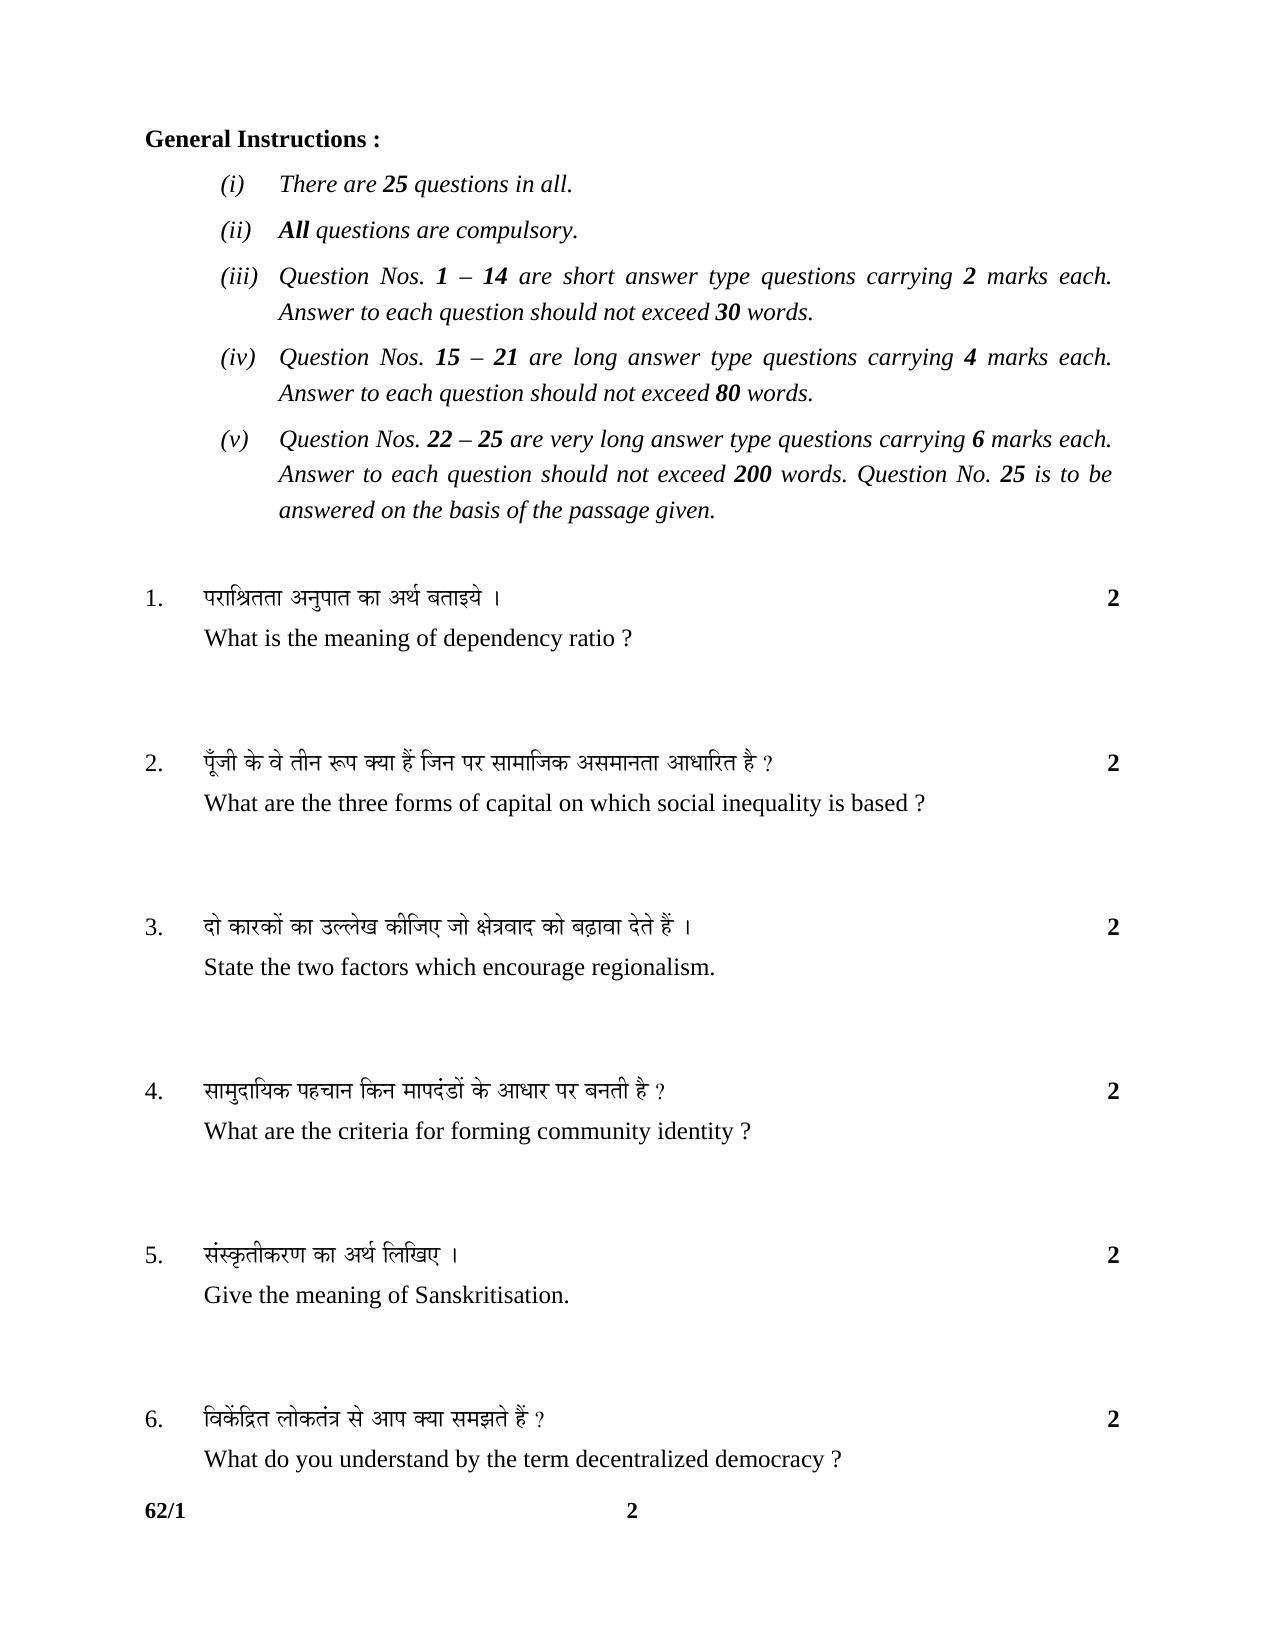 CBSE Class 12 62-1 SOCIOLOGY 2016 Question Paper - Page 2